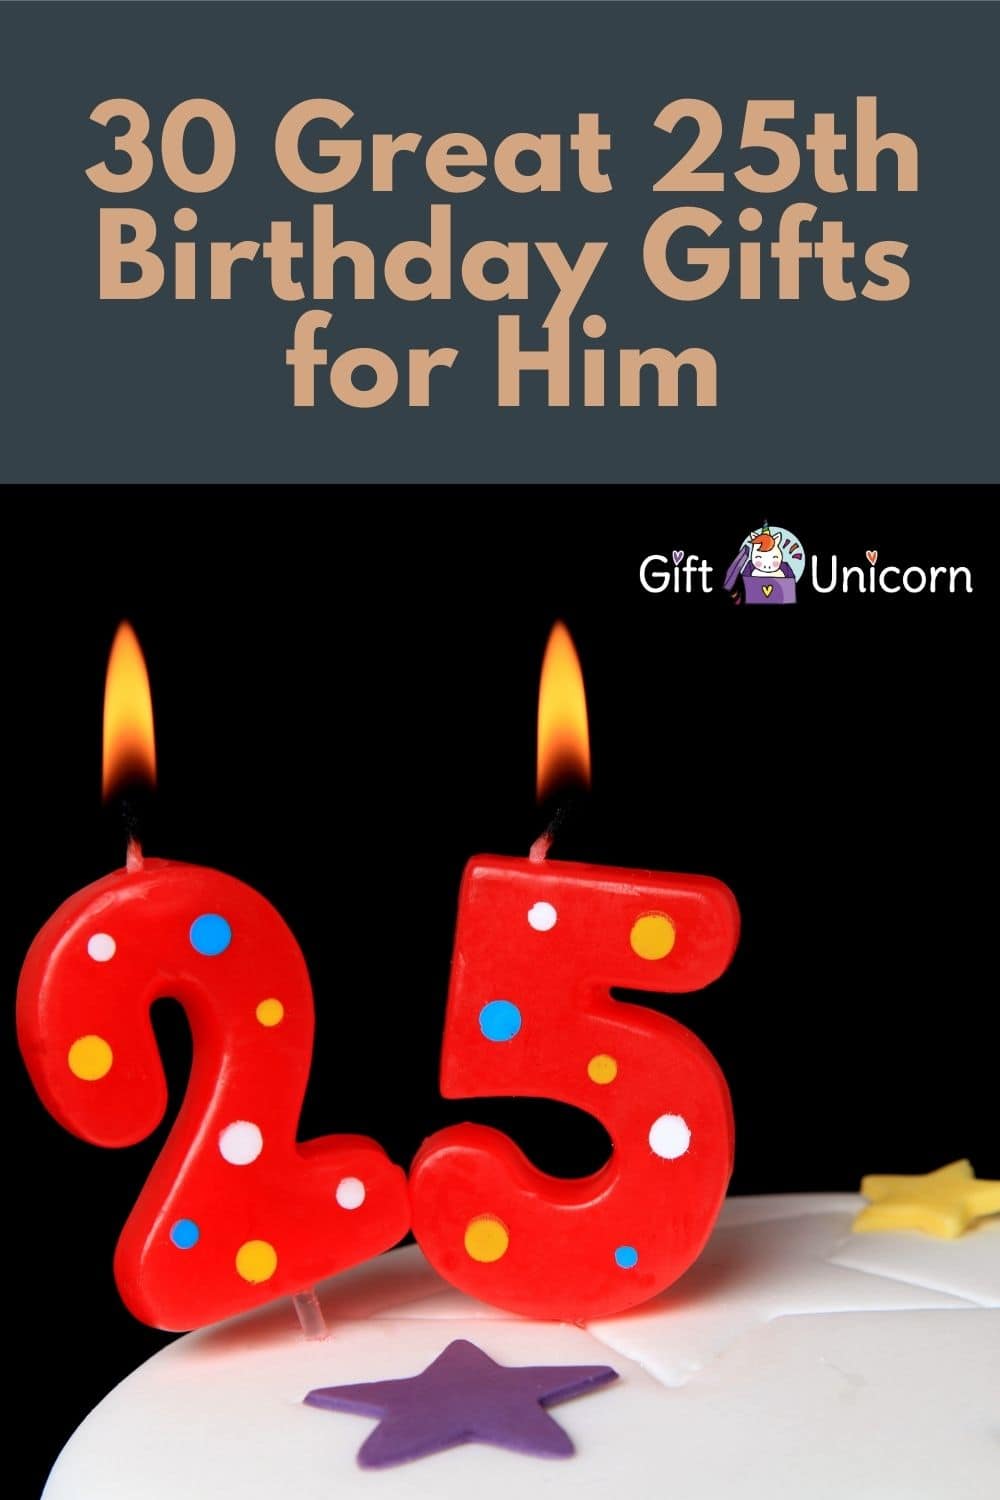 25th birthday gifts for him pin image